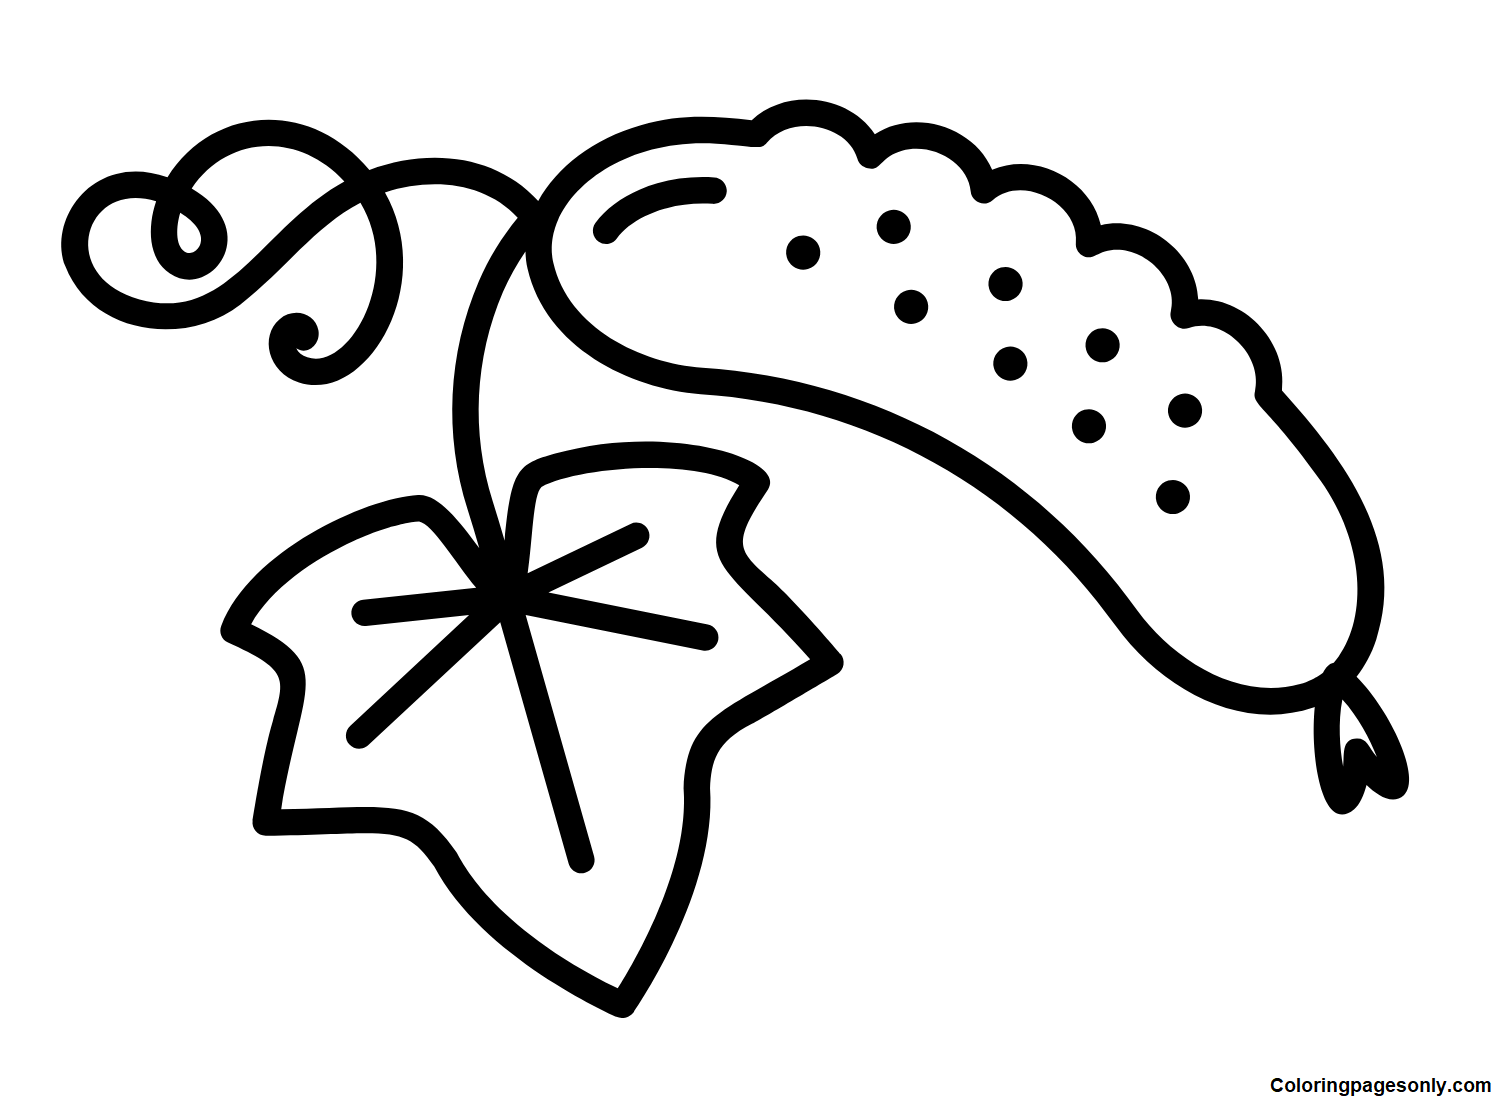 Cucumber Vegetable Coloring Page